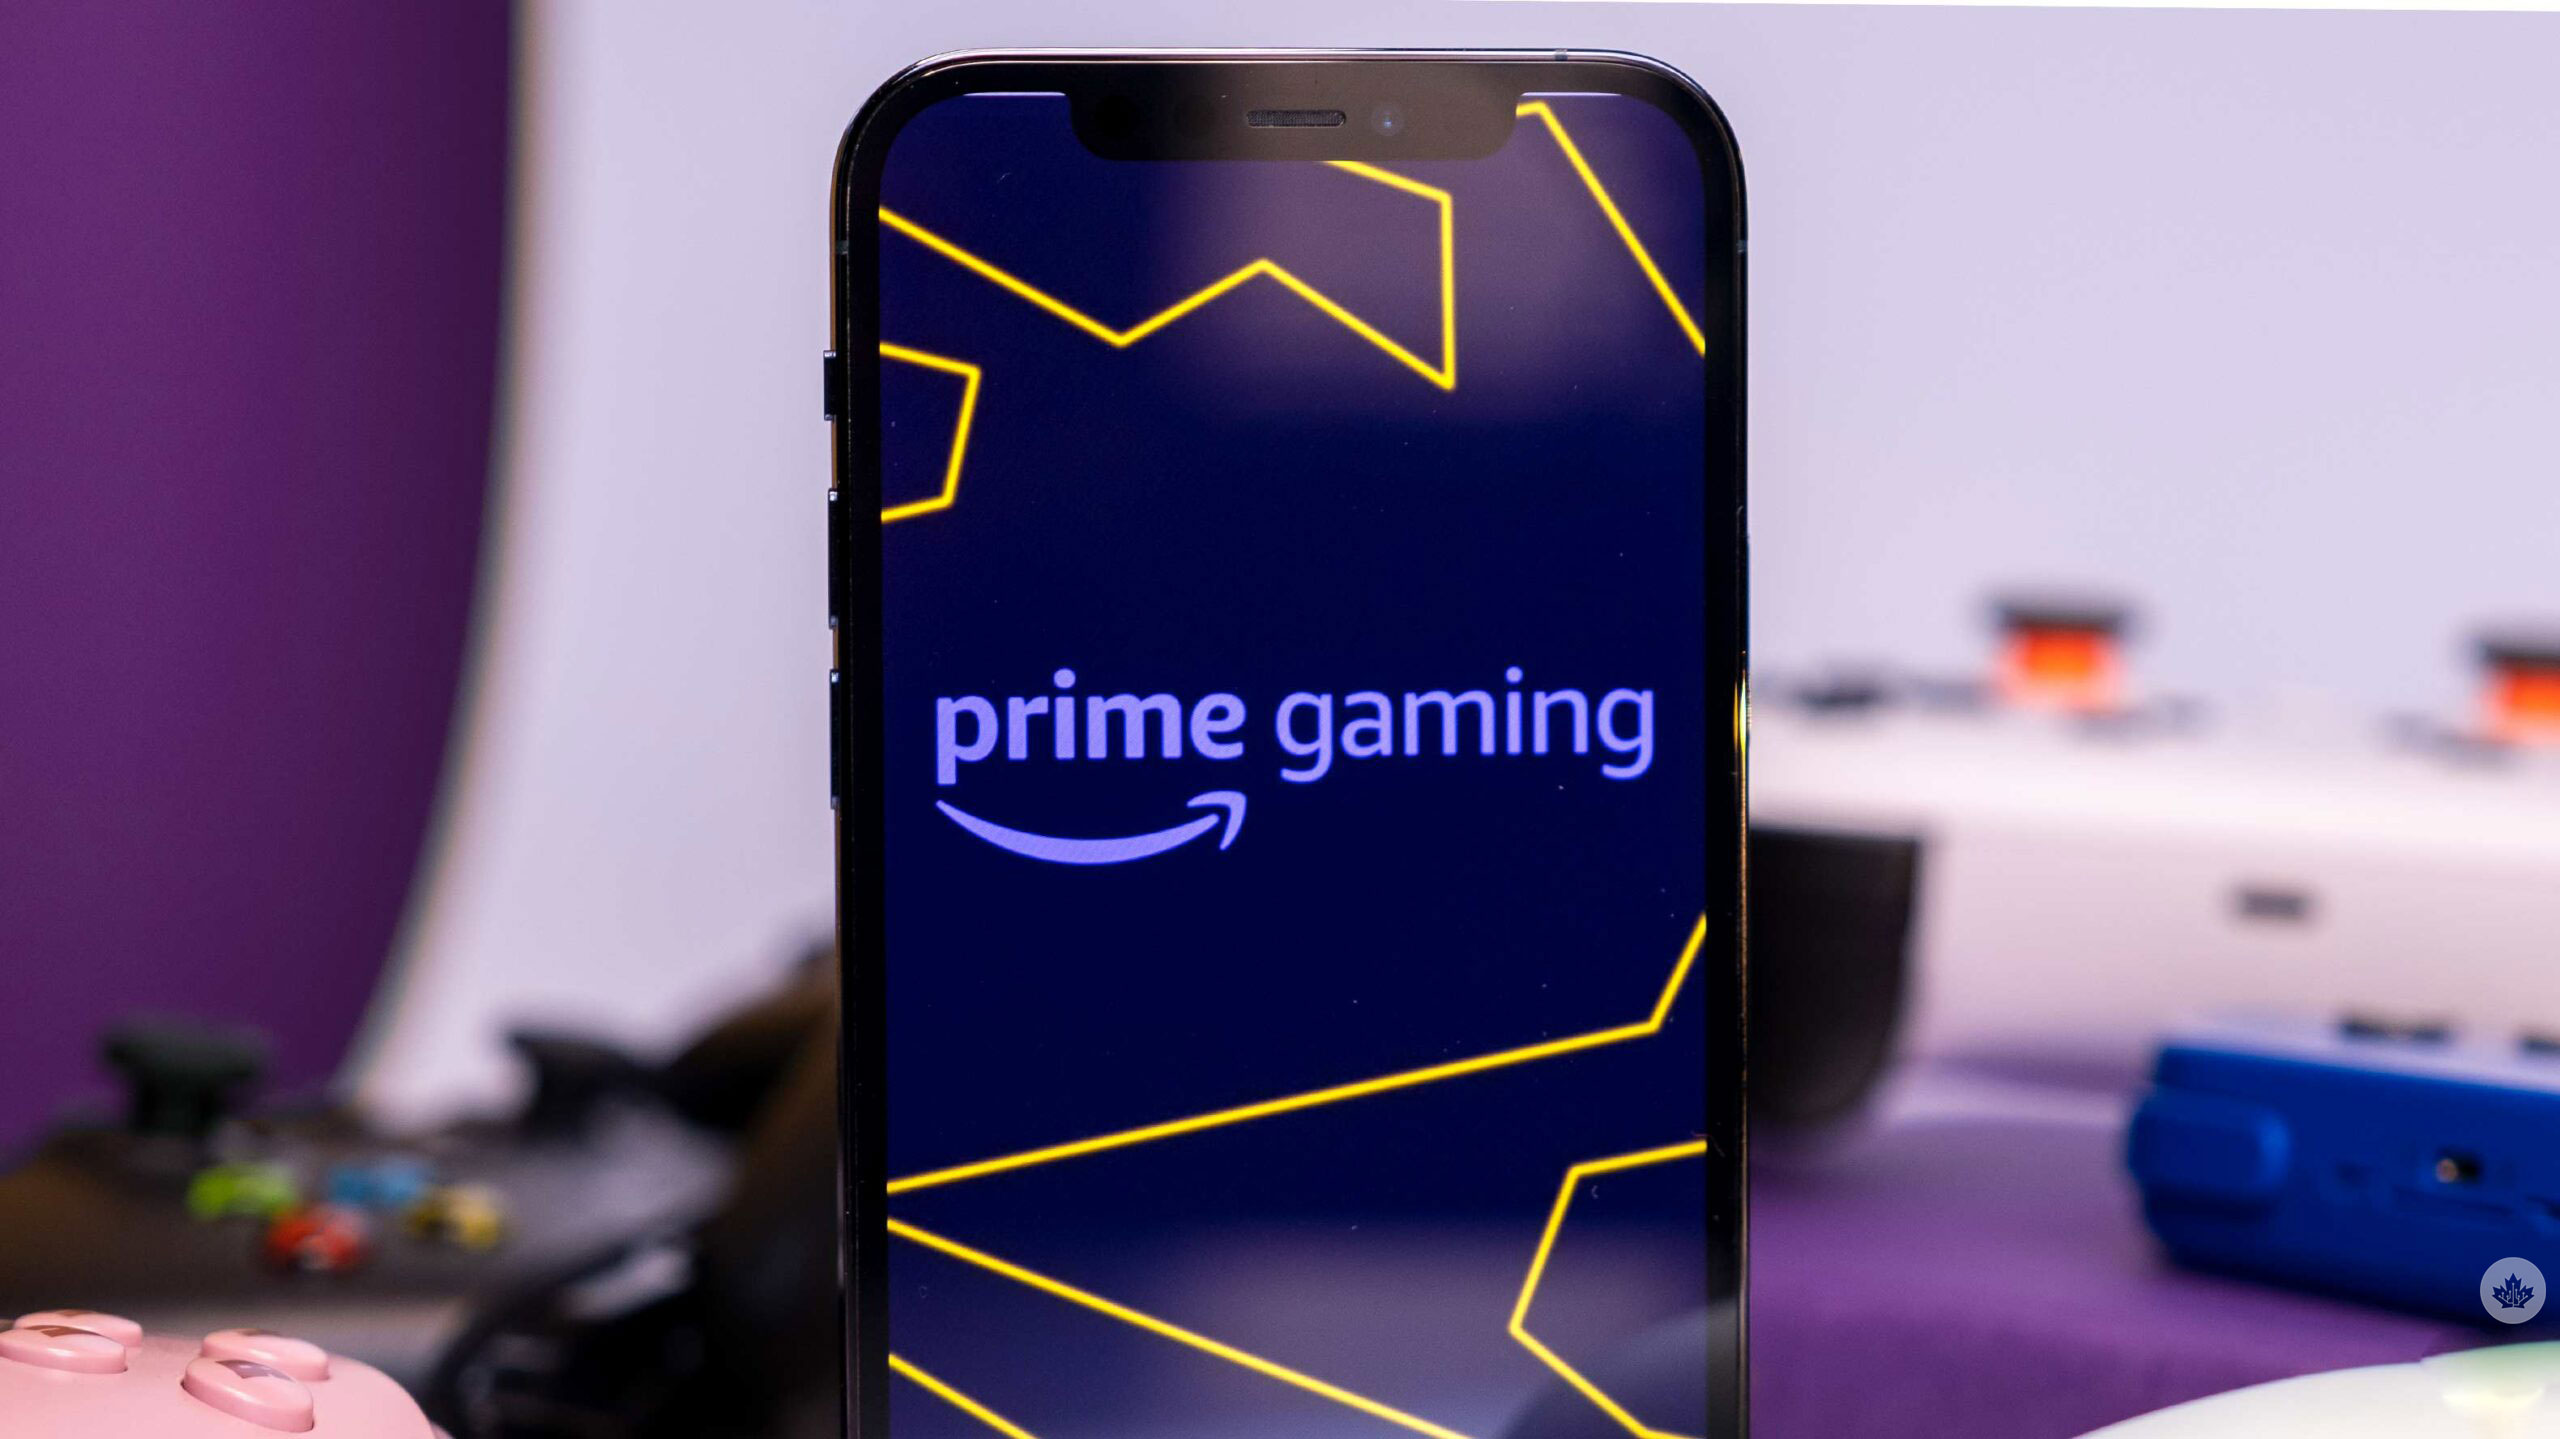 Is Prime Gaming Free With  Prime? Here's What to Know